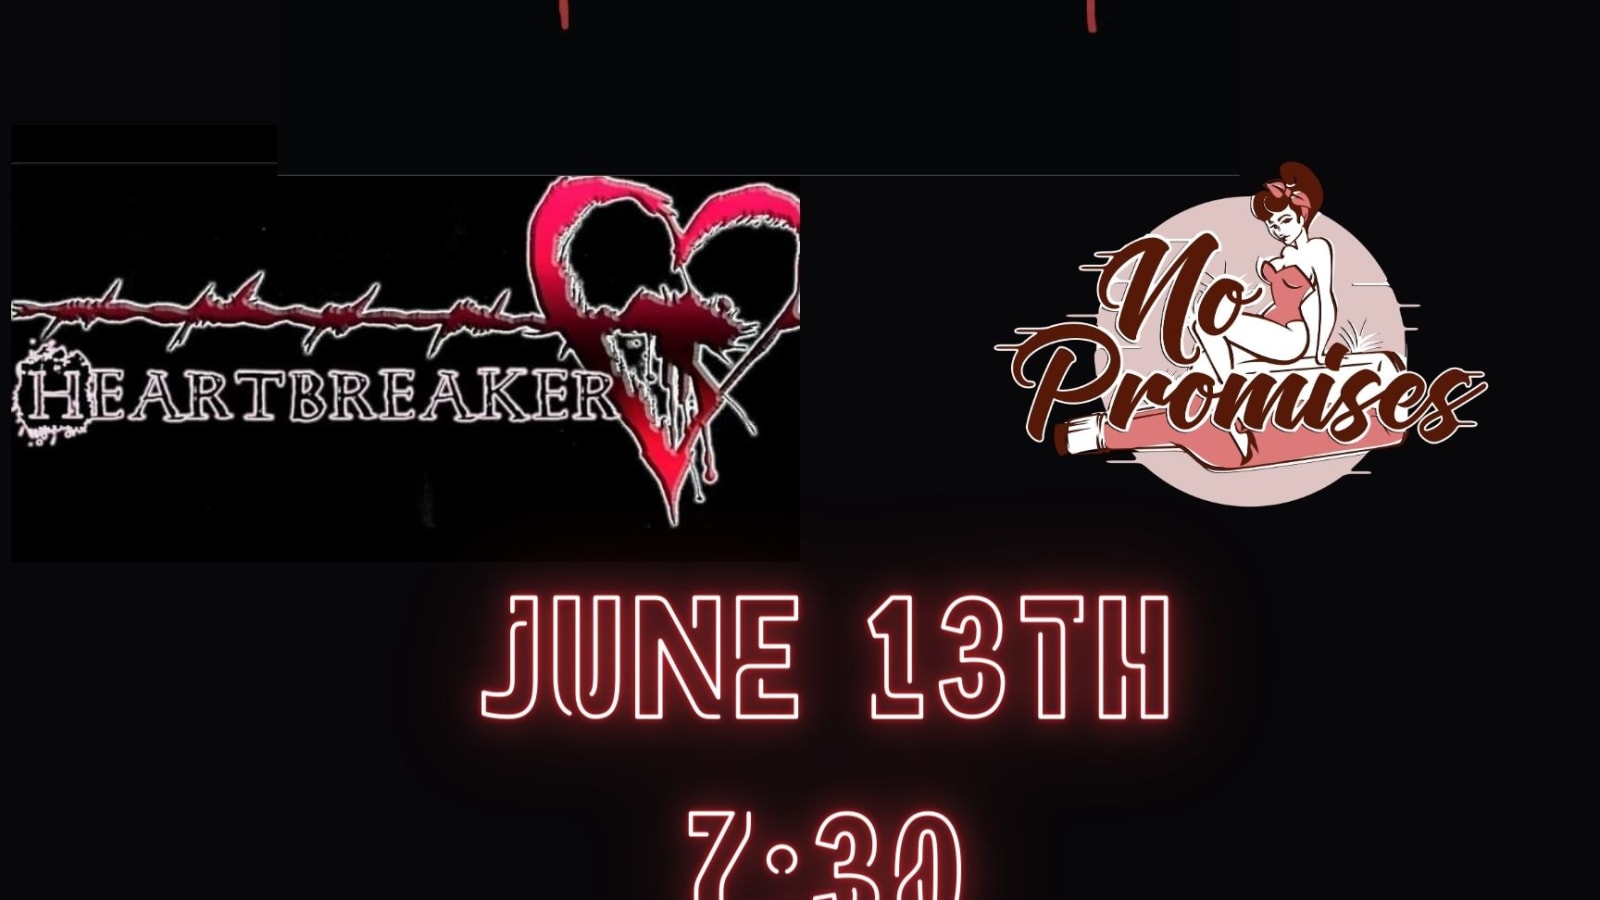 No Promises and Heartbreaker Rock Madlife Stage!!